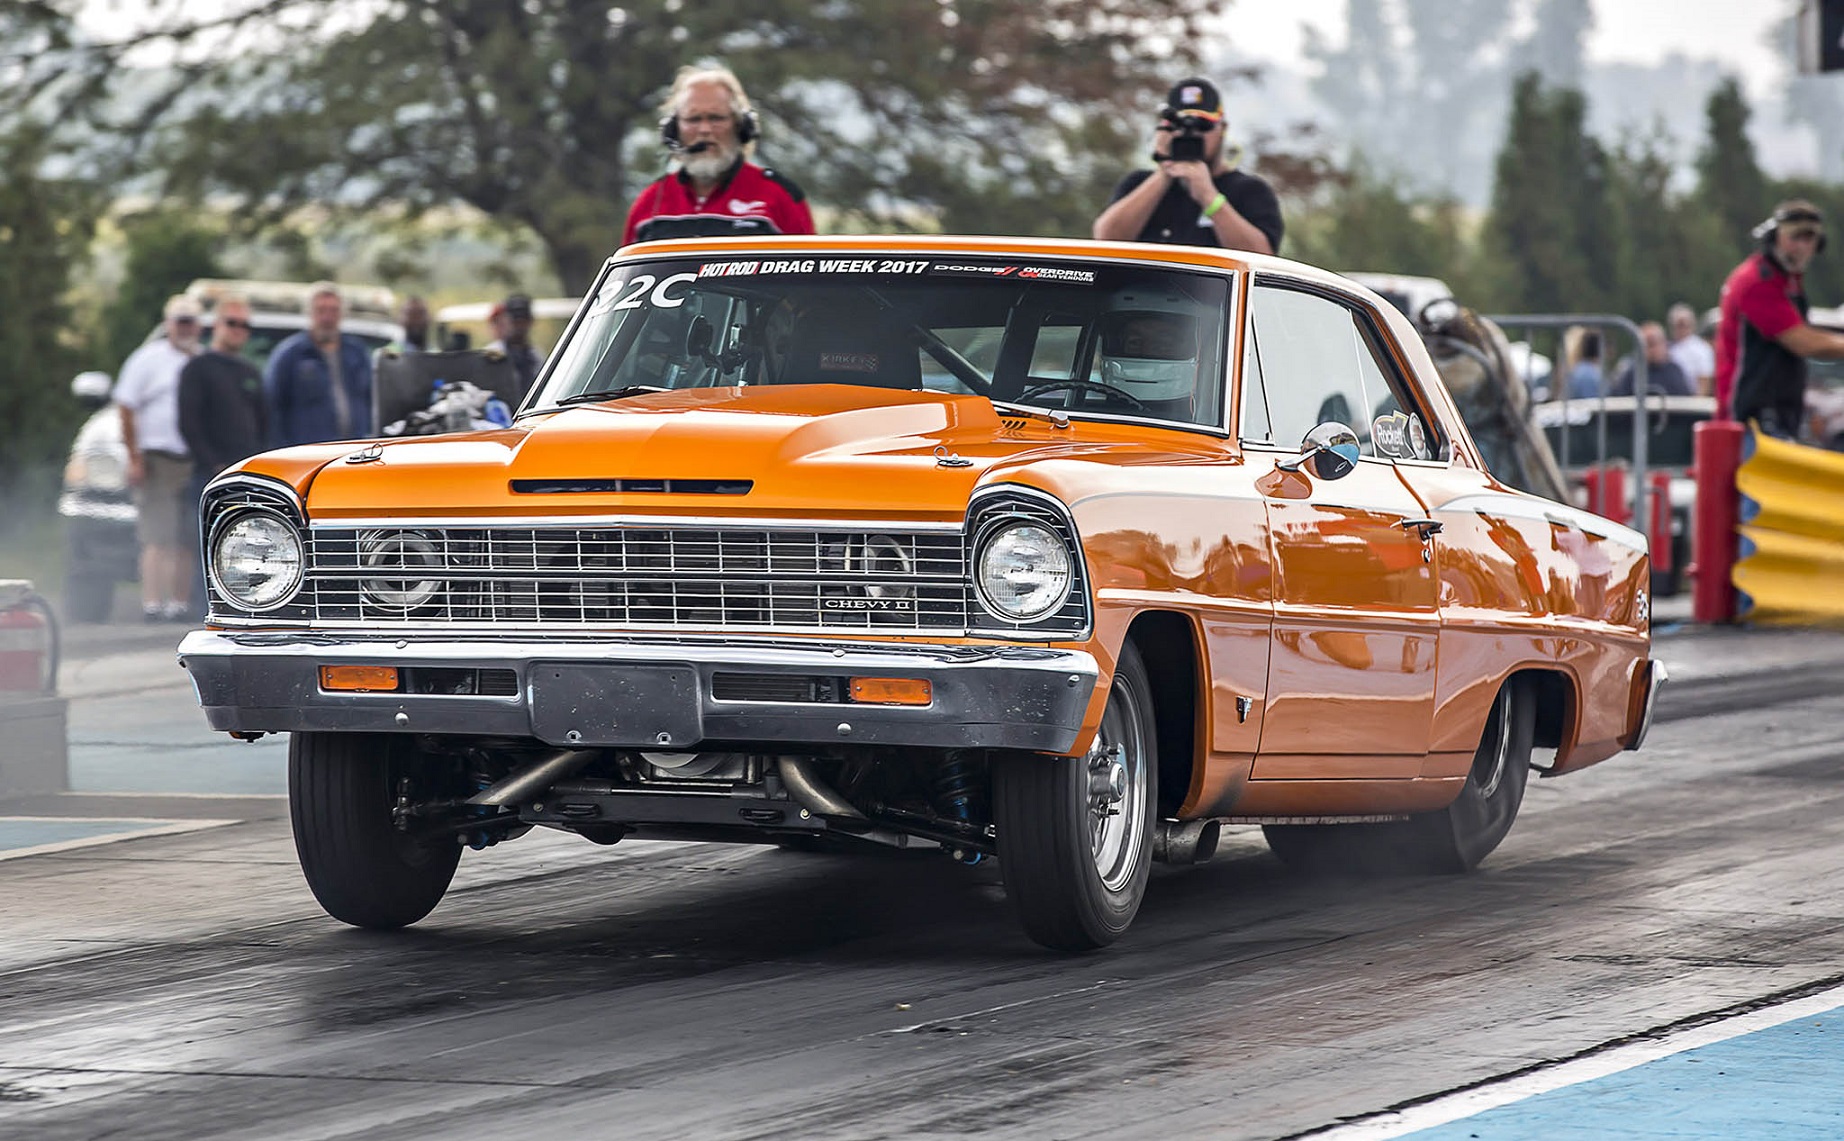 Attached picture 592-Thursday-Great-Lakes-Drag-Week-2017.jpg